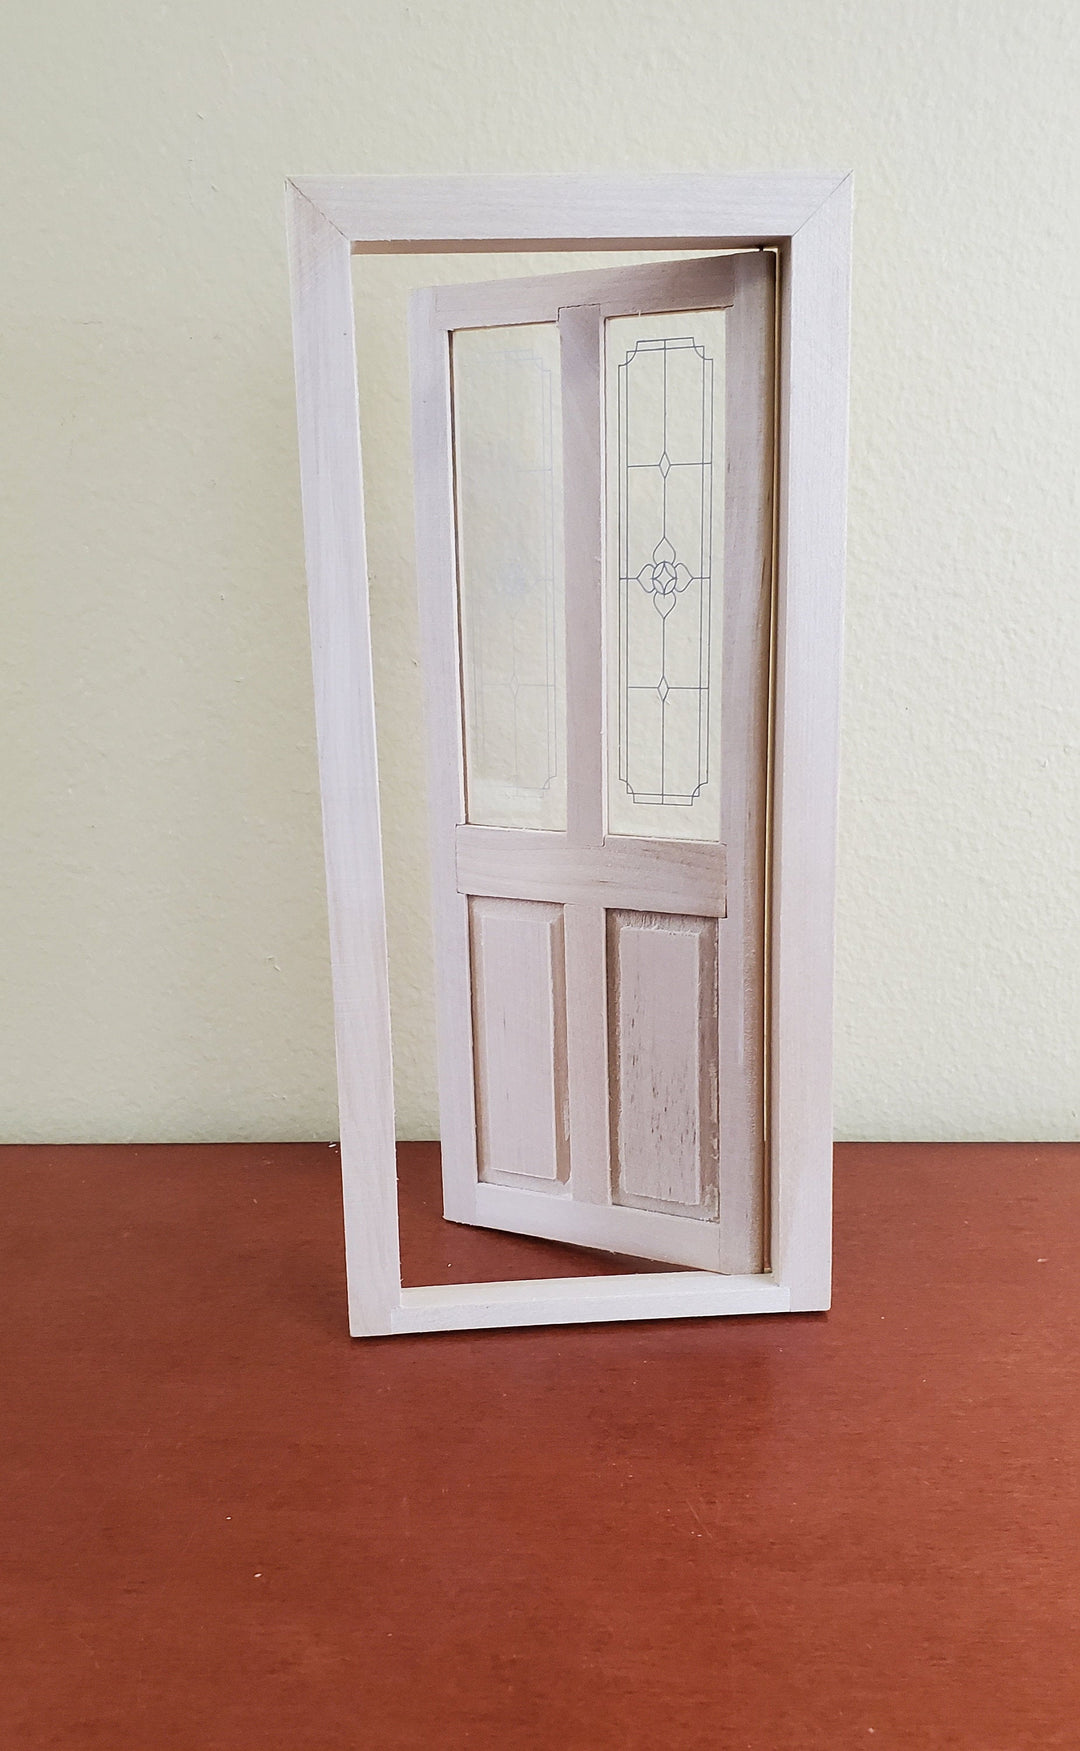 Dollhouse Exterior Front Door w/ Windows Etched Panes 1:12 Scale Unpainted Wood